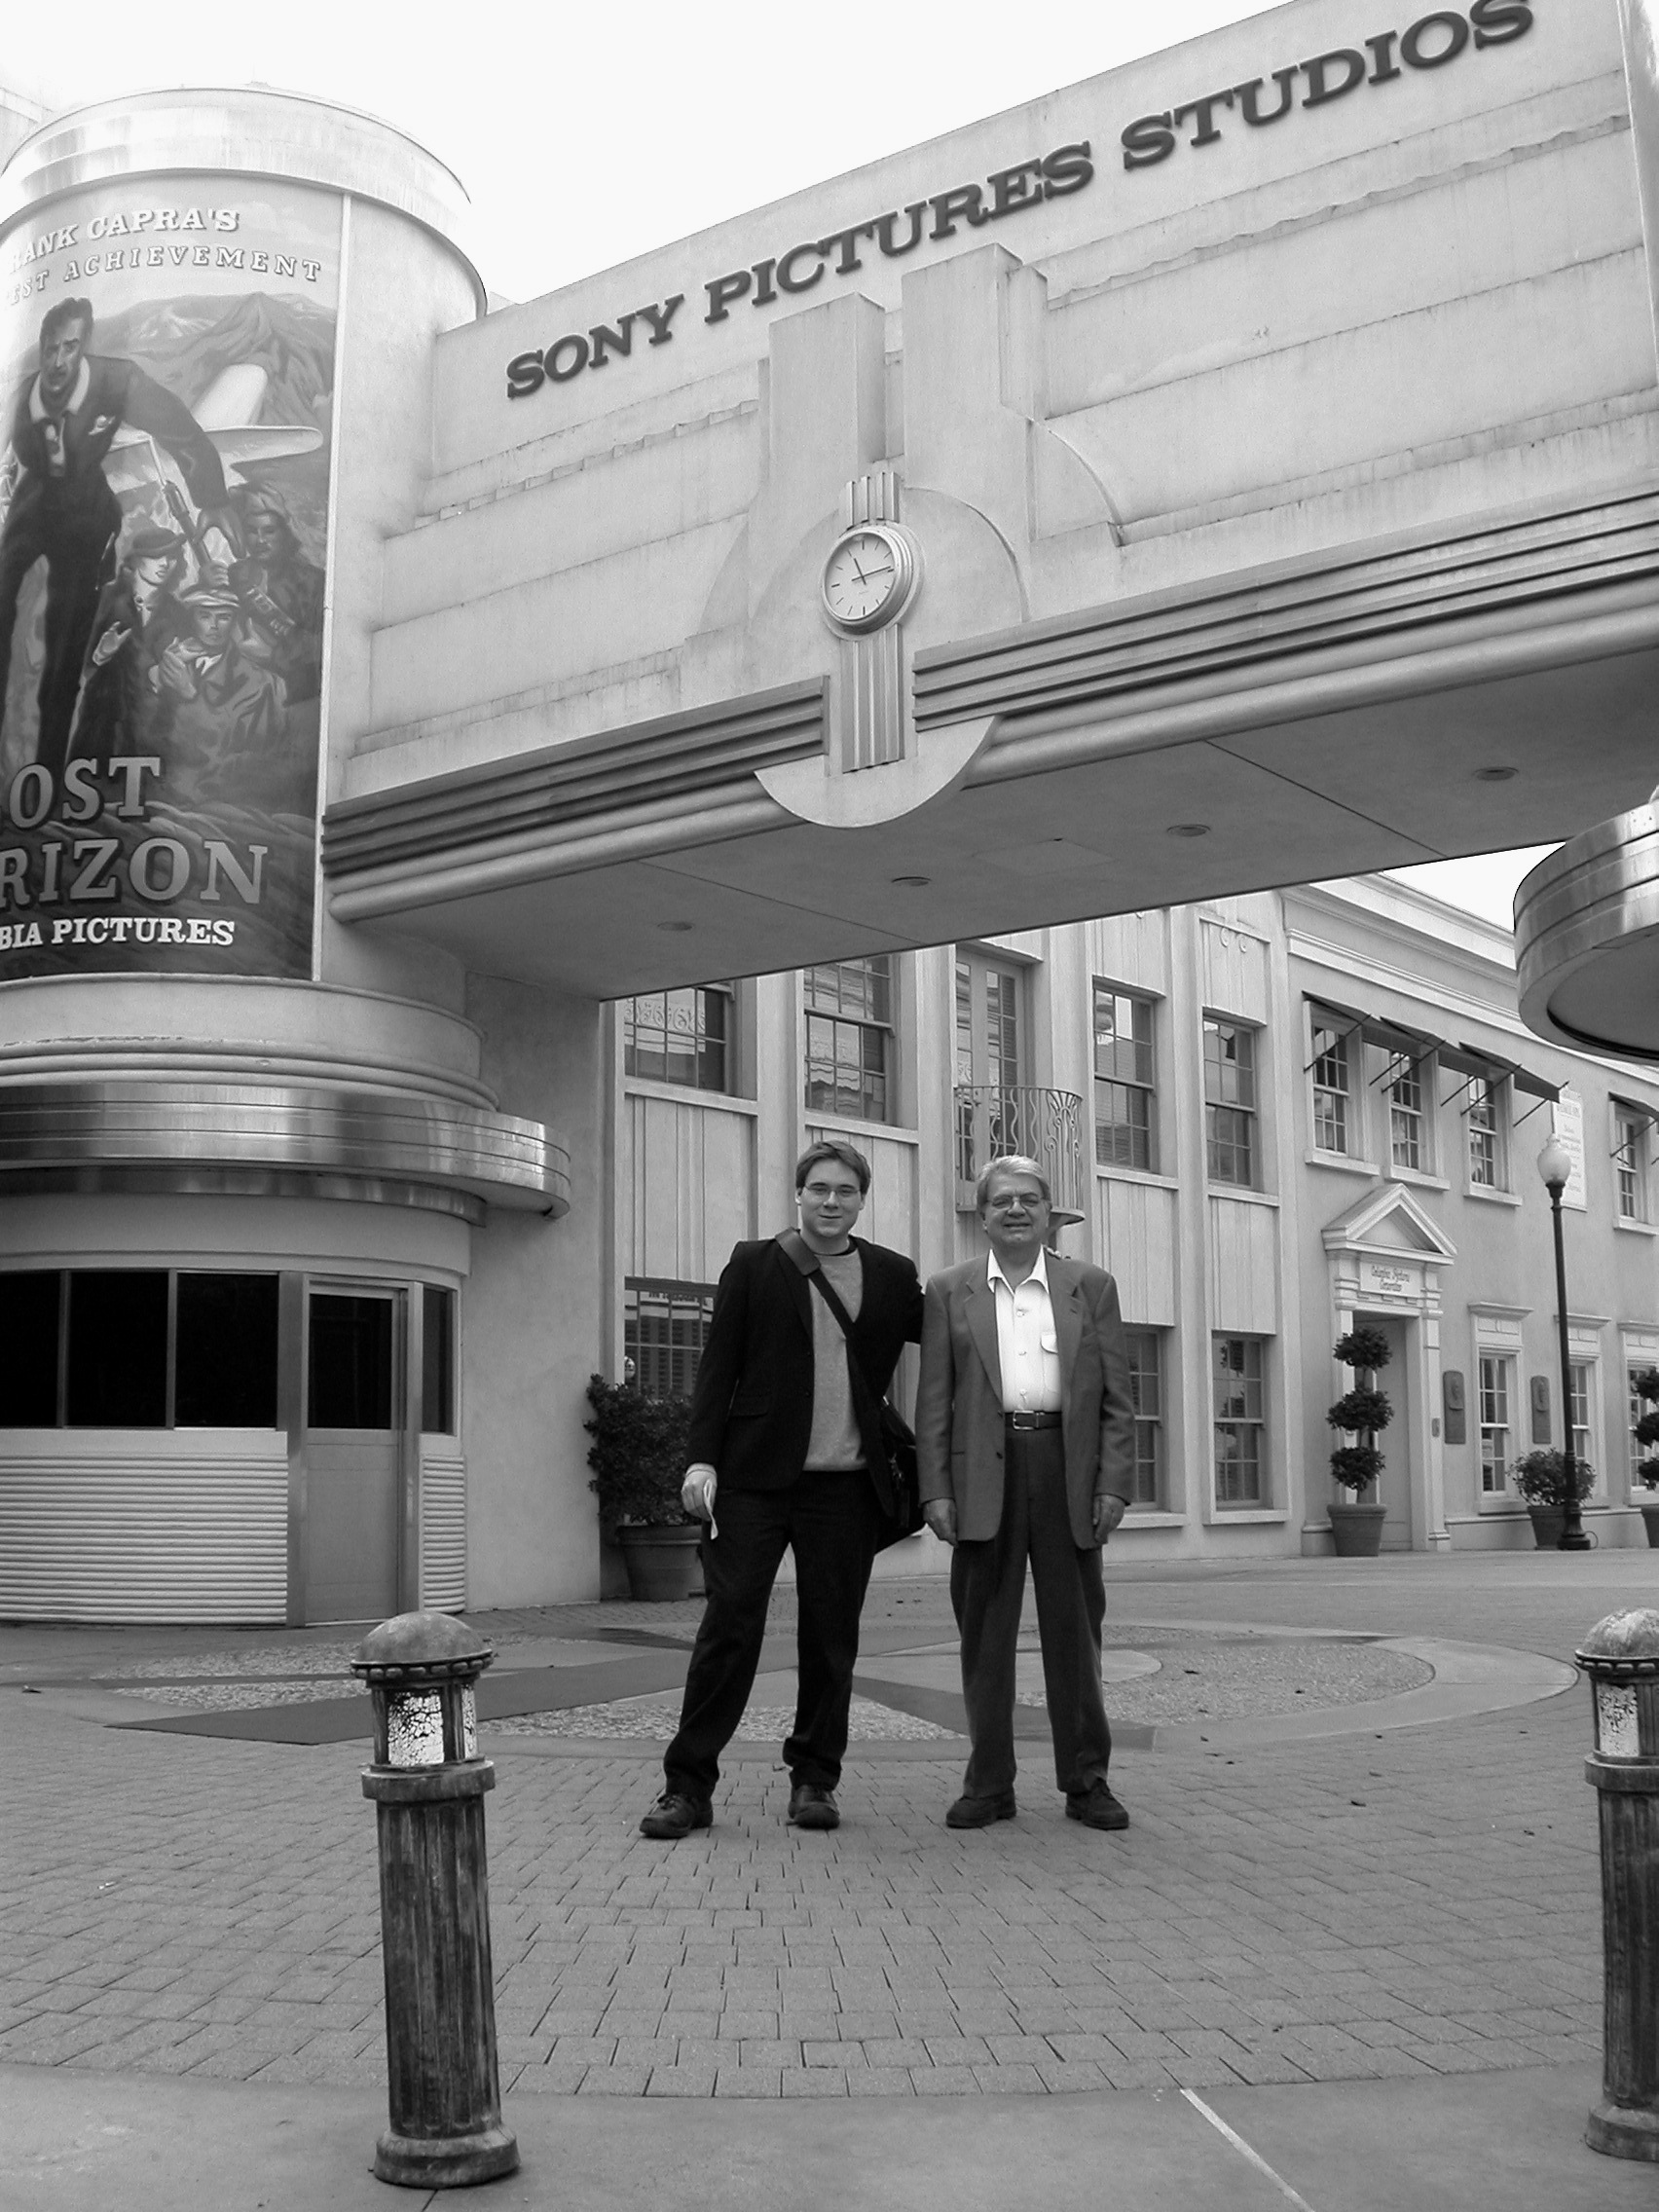 Carlos Ferrer (Left) with Gil Ferrer (Right) at Sony Pictures Studios